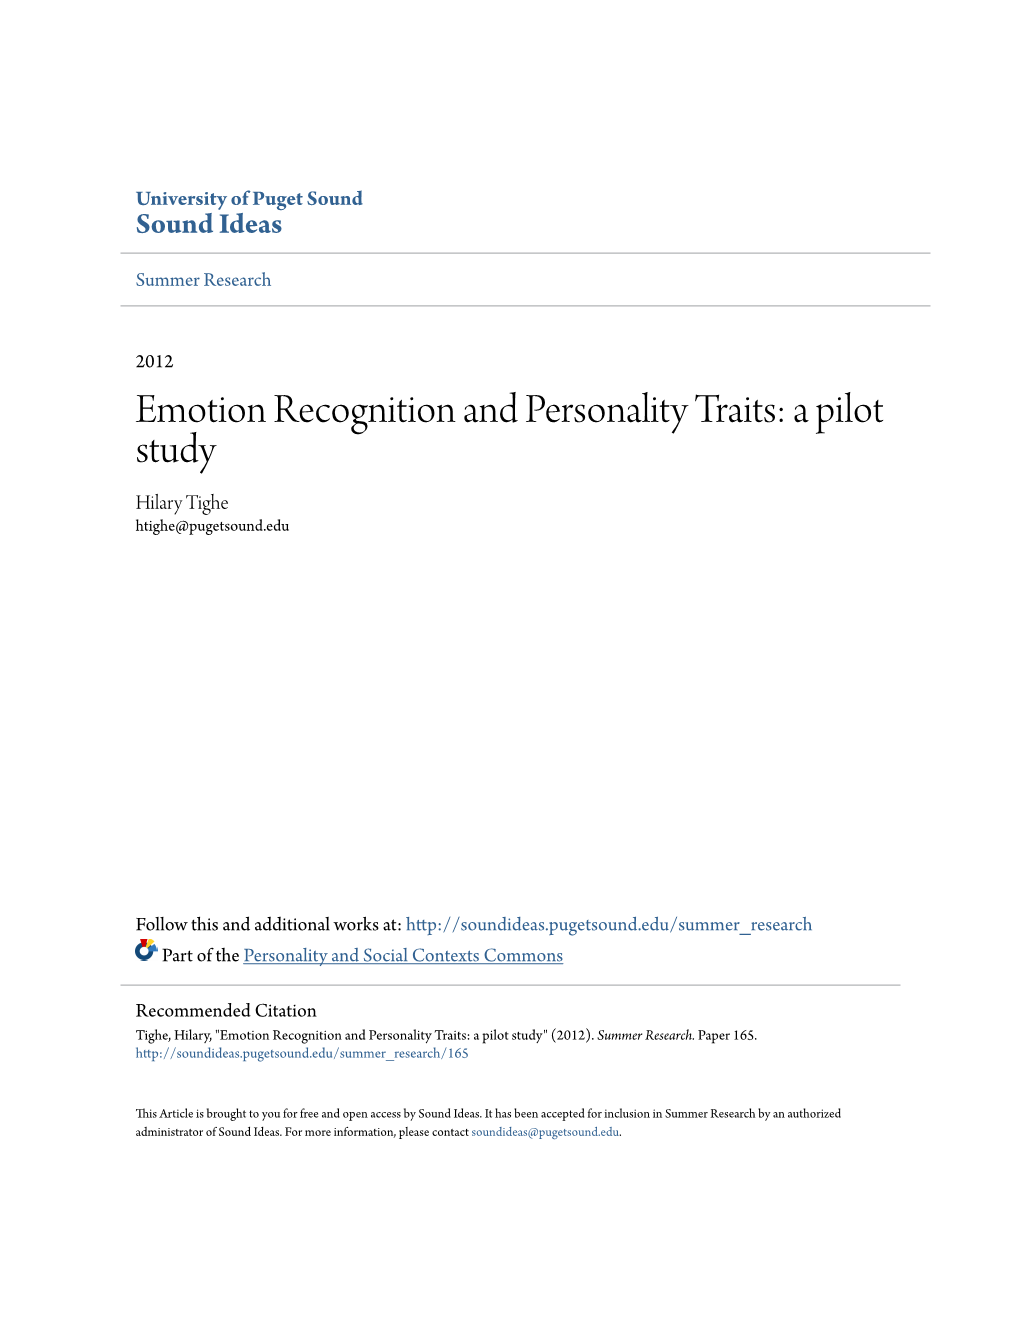 Emotion Recognition and Personality Traits: a Pilot Study Hilary Tighe Htighe@Pugetsound.Edu